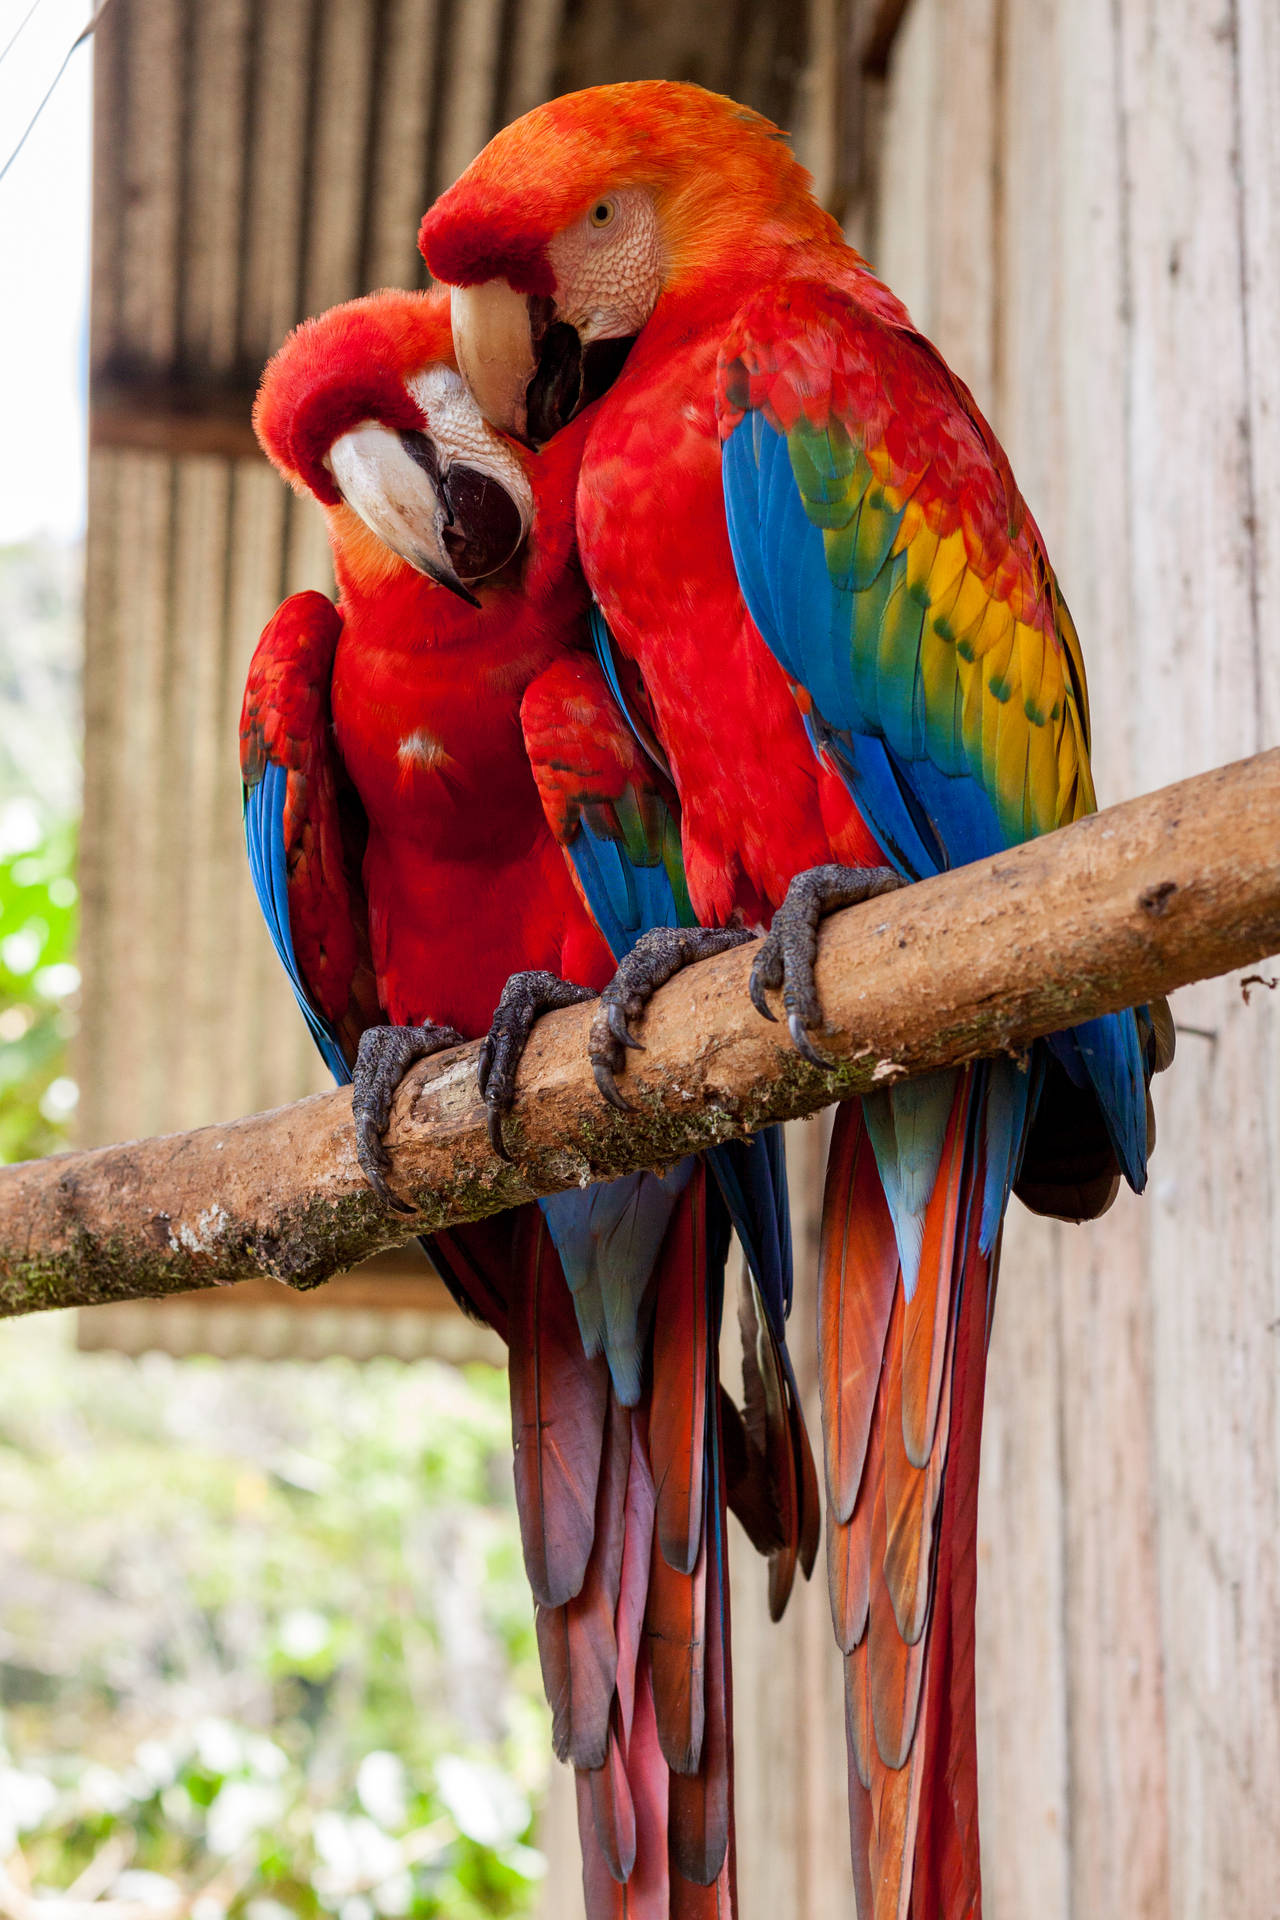 A charming couple of Red Parrot birds. Wallpaper